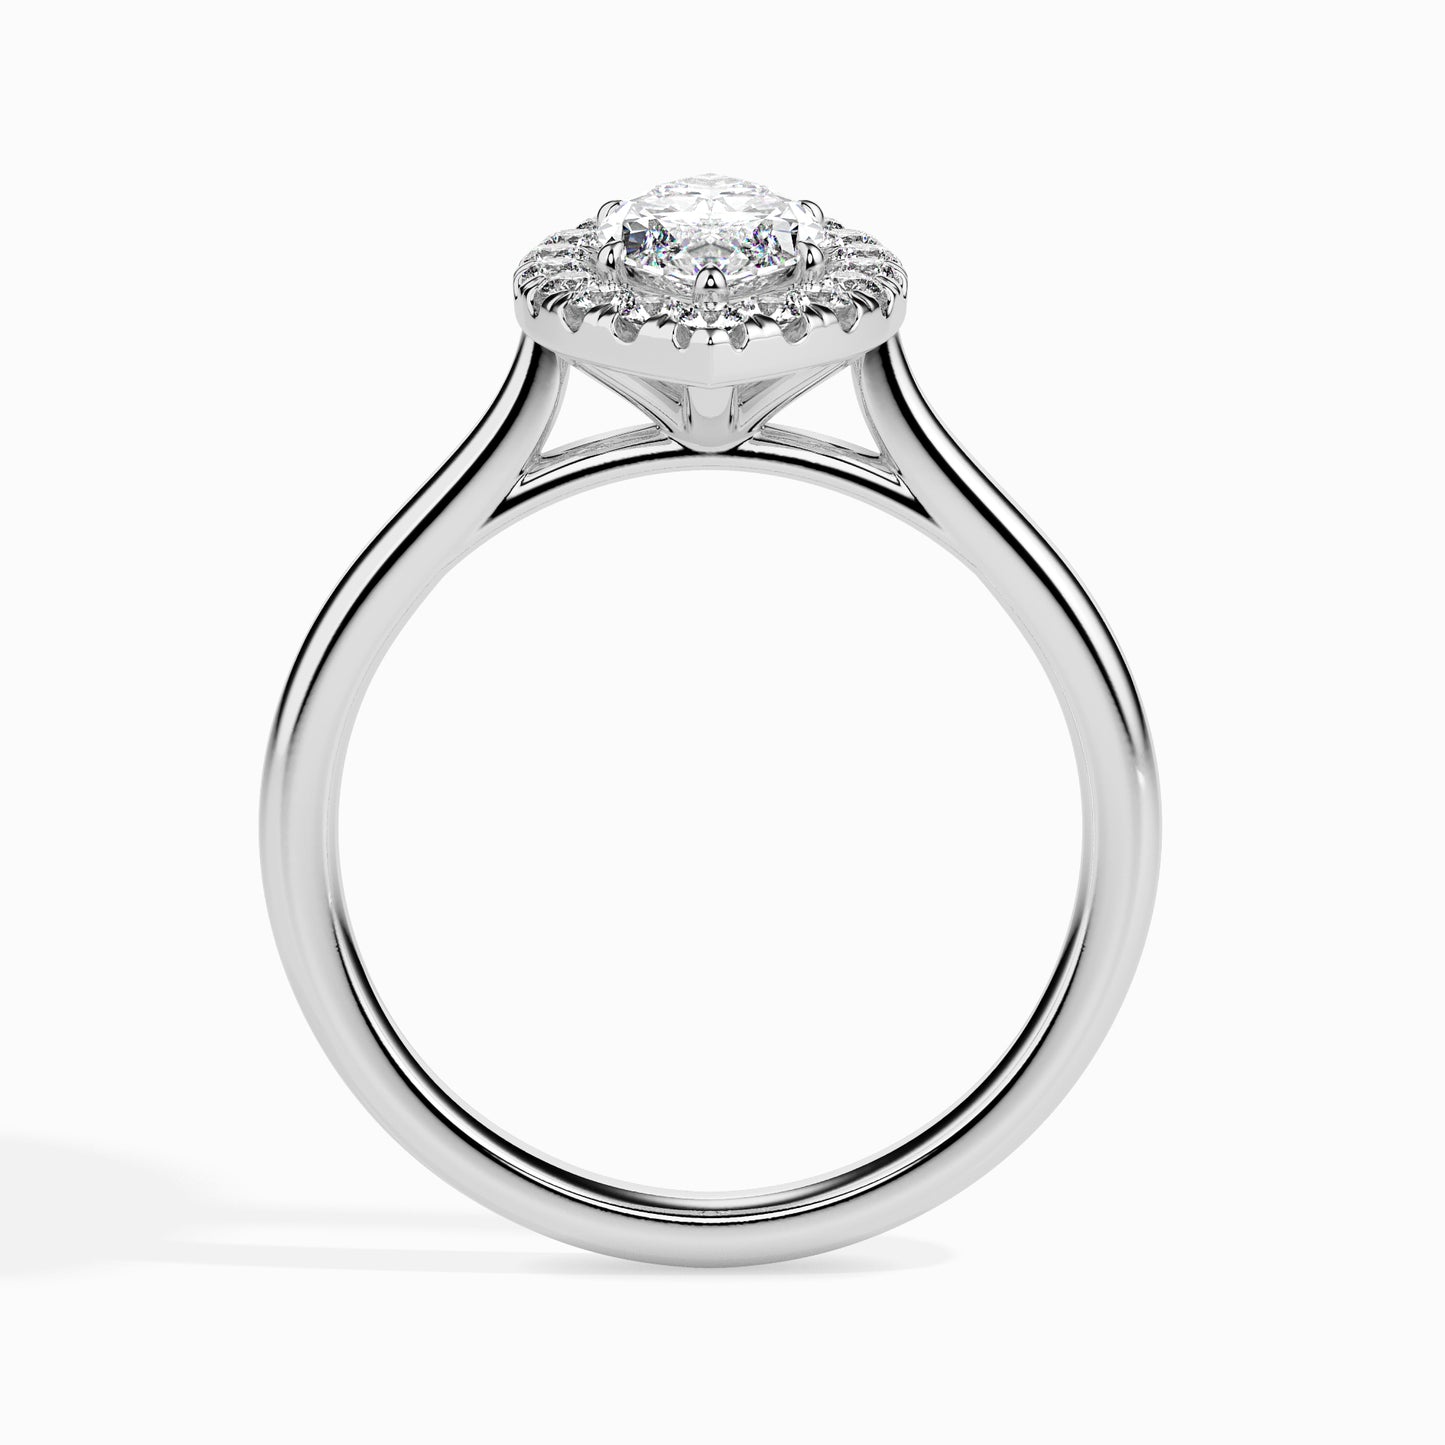 Solitaire Engagement Diamond Ring in 18 karat White Gold by Fiona Diamonds